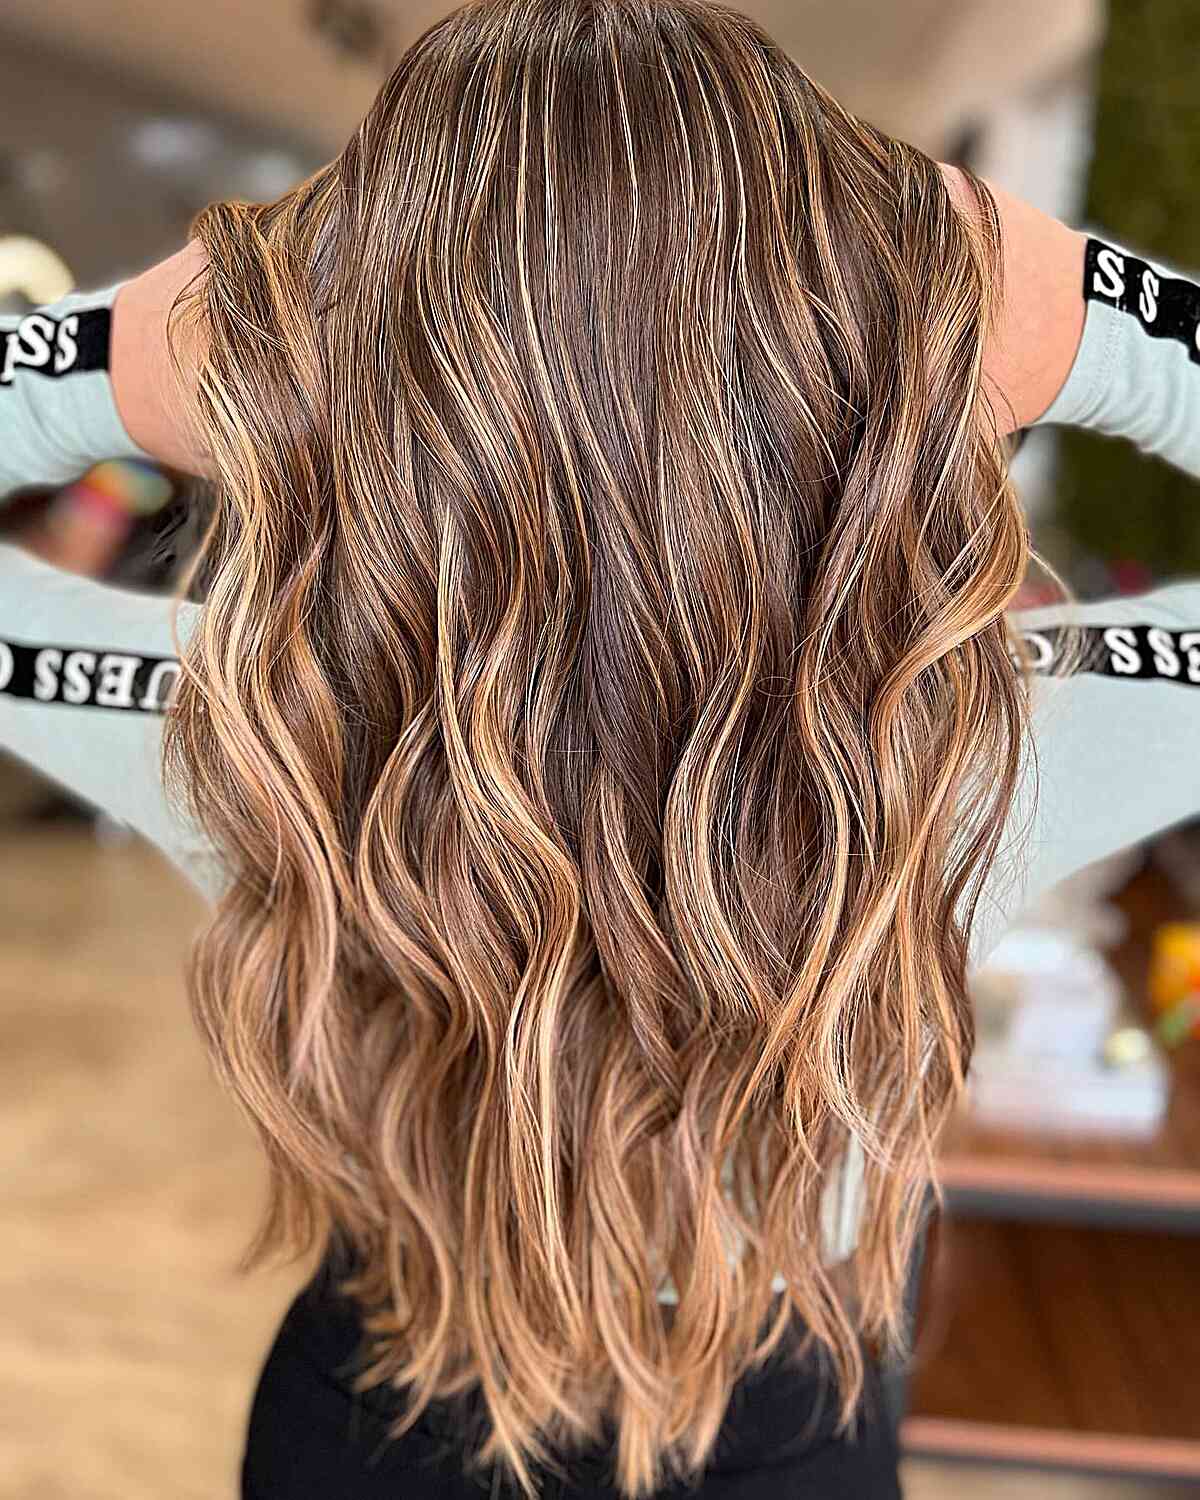 Long Wavy Dark Hair with Caramel Blonde Ombre Highlights